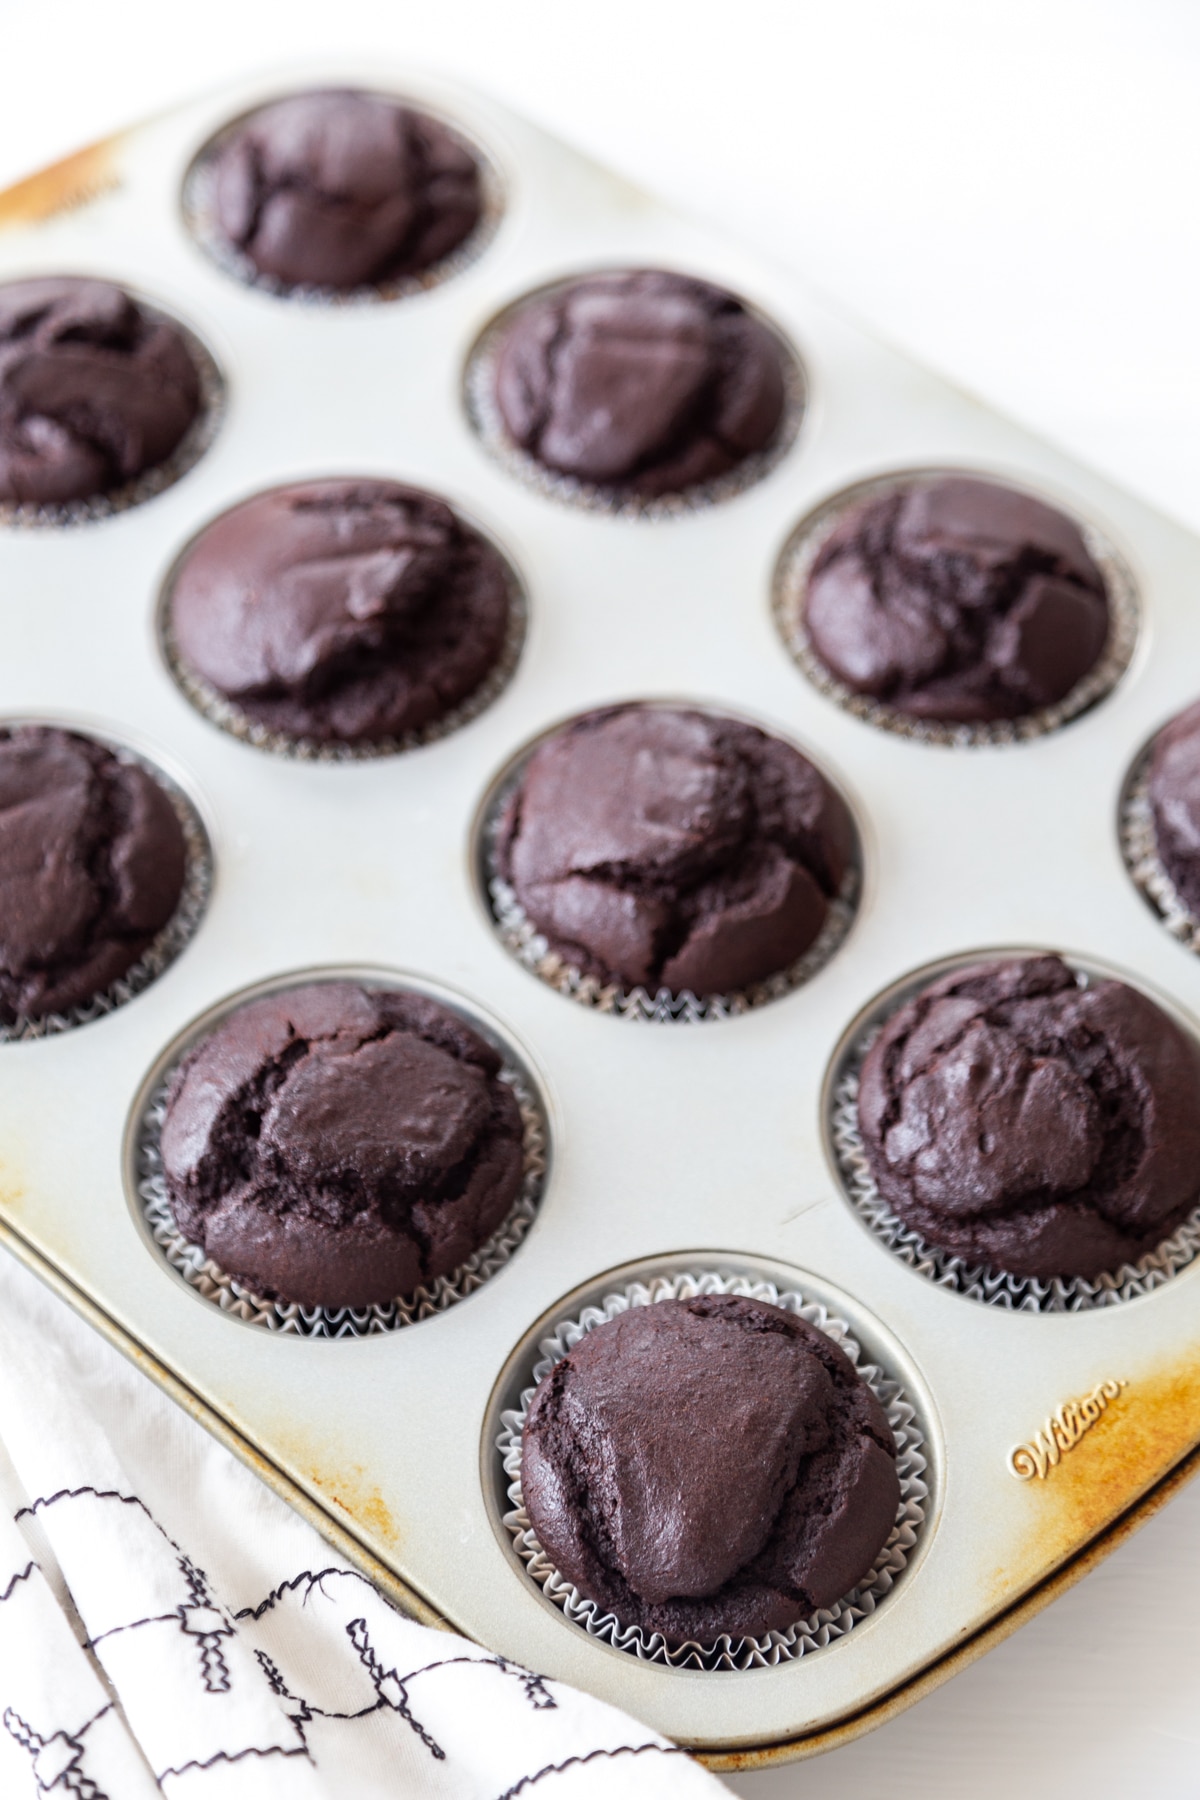 A muffin tin with chocolate cupcakes and a white and black towel next to the tin.